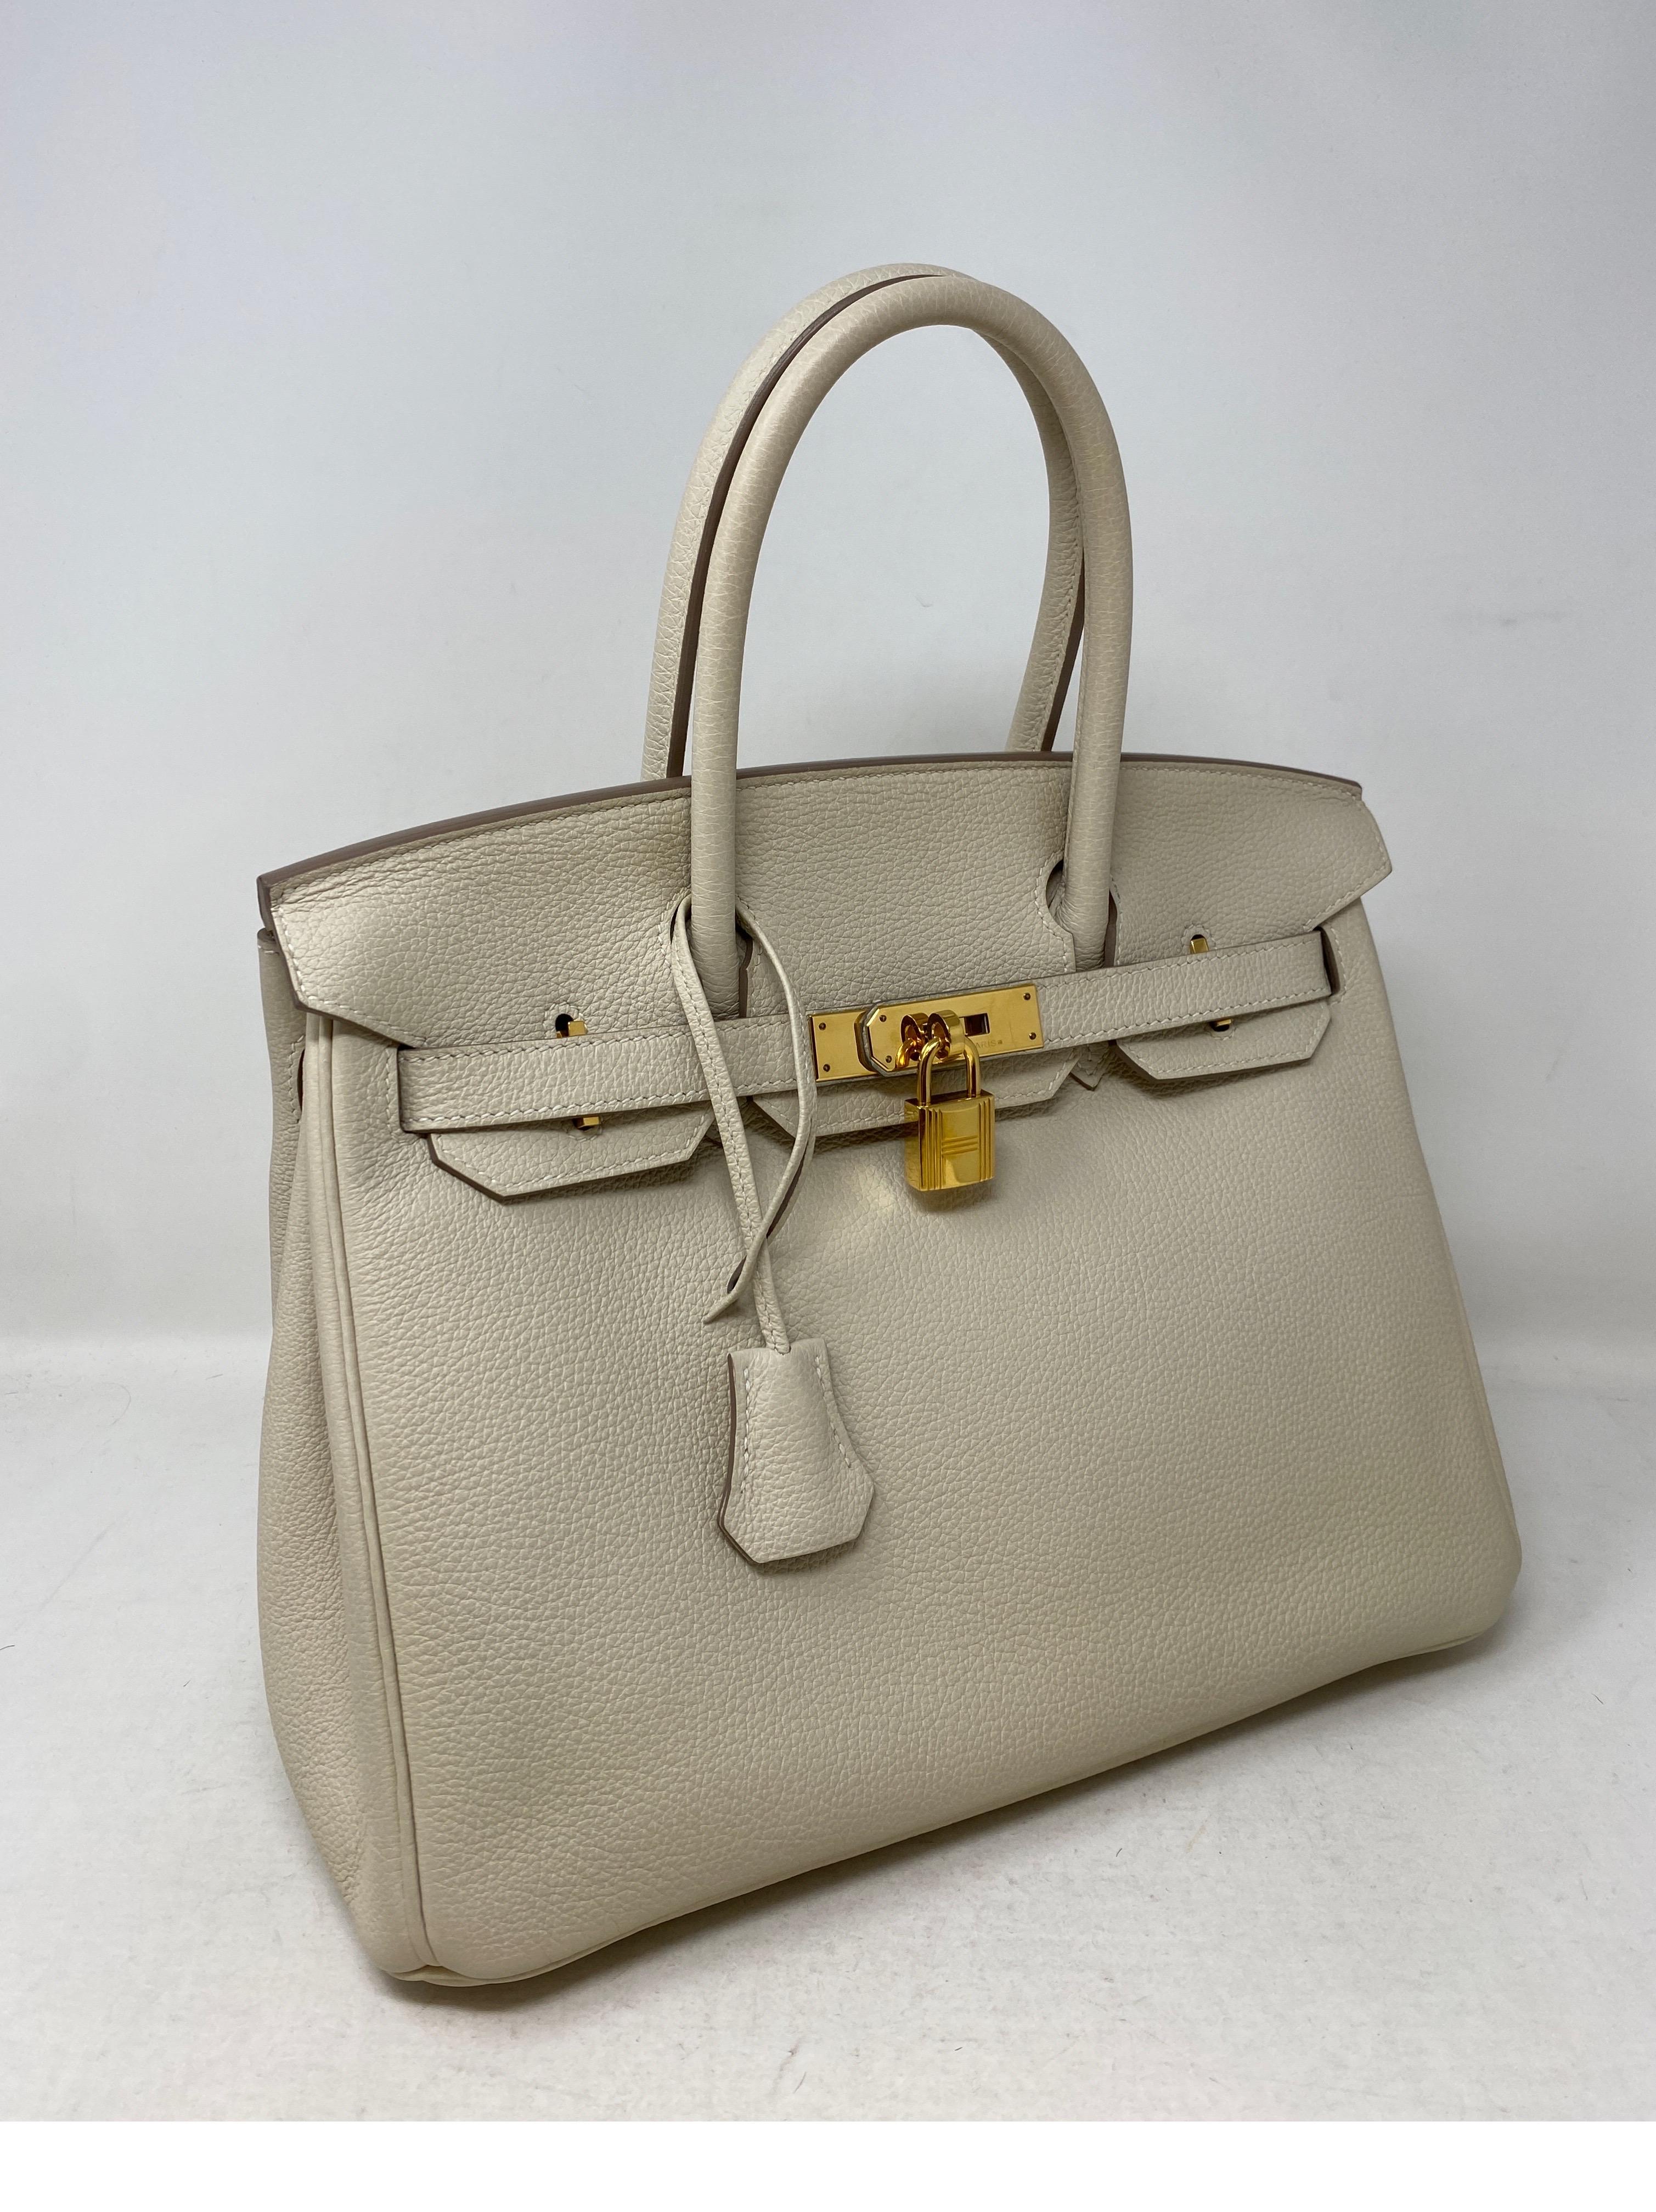 Hermes Birkin Craie 30 Bag. Excellent like new condition. Rare color and size 30. Beautiful eggshell cream color leather with gold hardware. Togo leather. T stamp. Very hard to find bag. Don't miss out. Full set. Includes clochette, lock, keys, dust